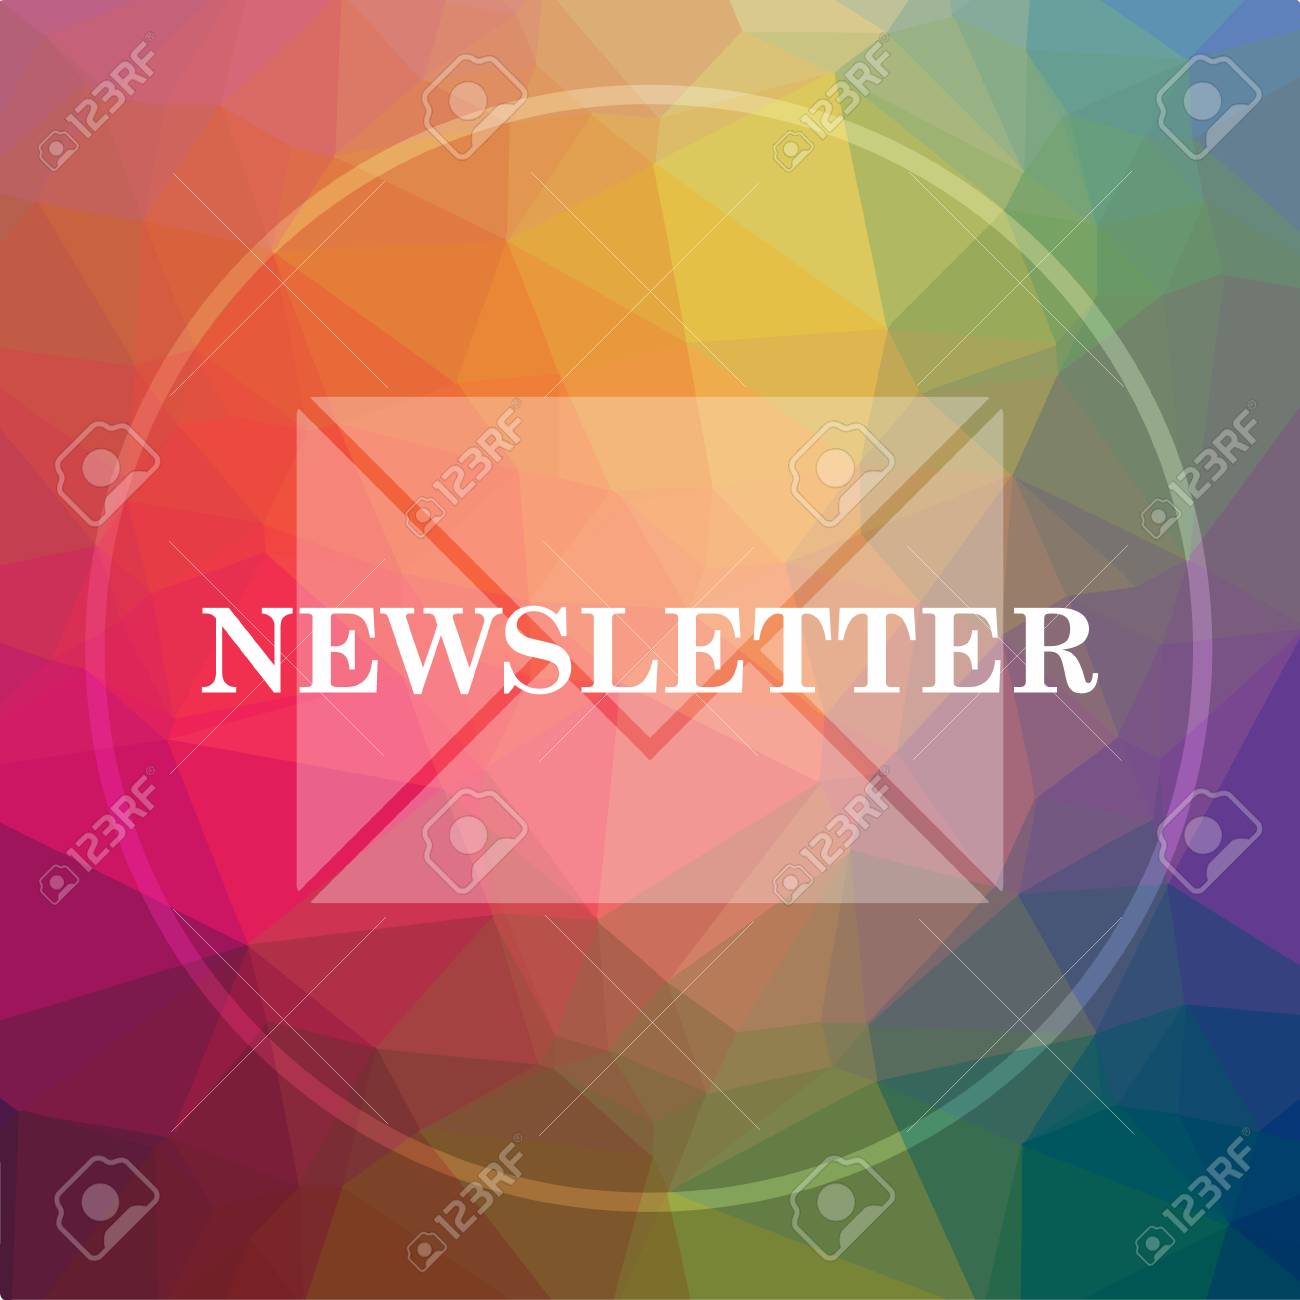 Newsletter Icon Website Button On Low Poly Background